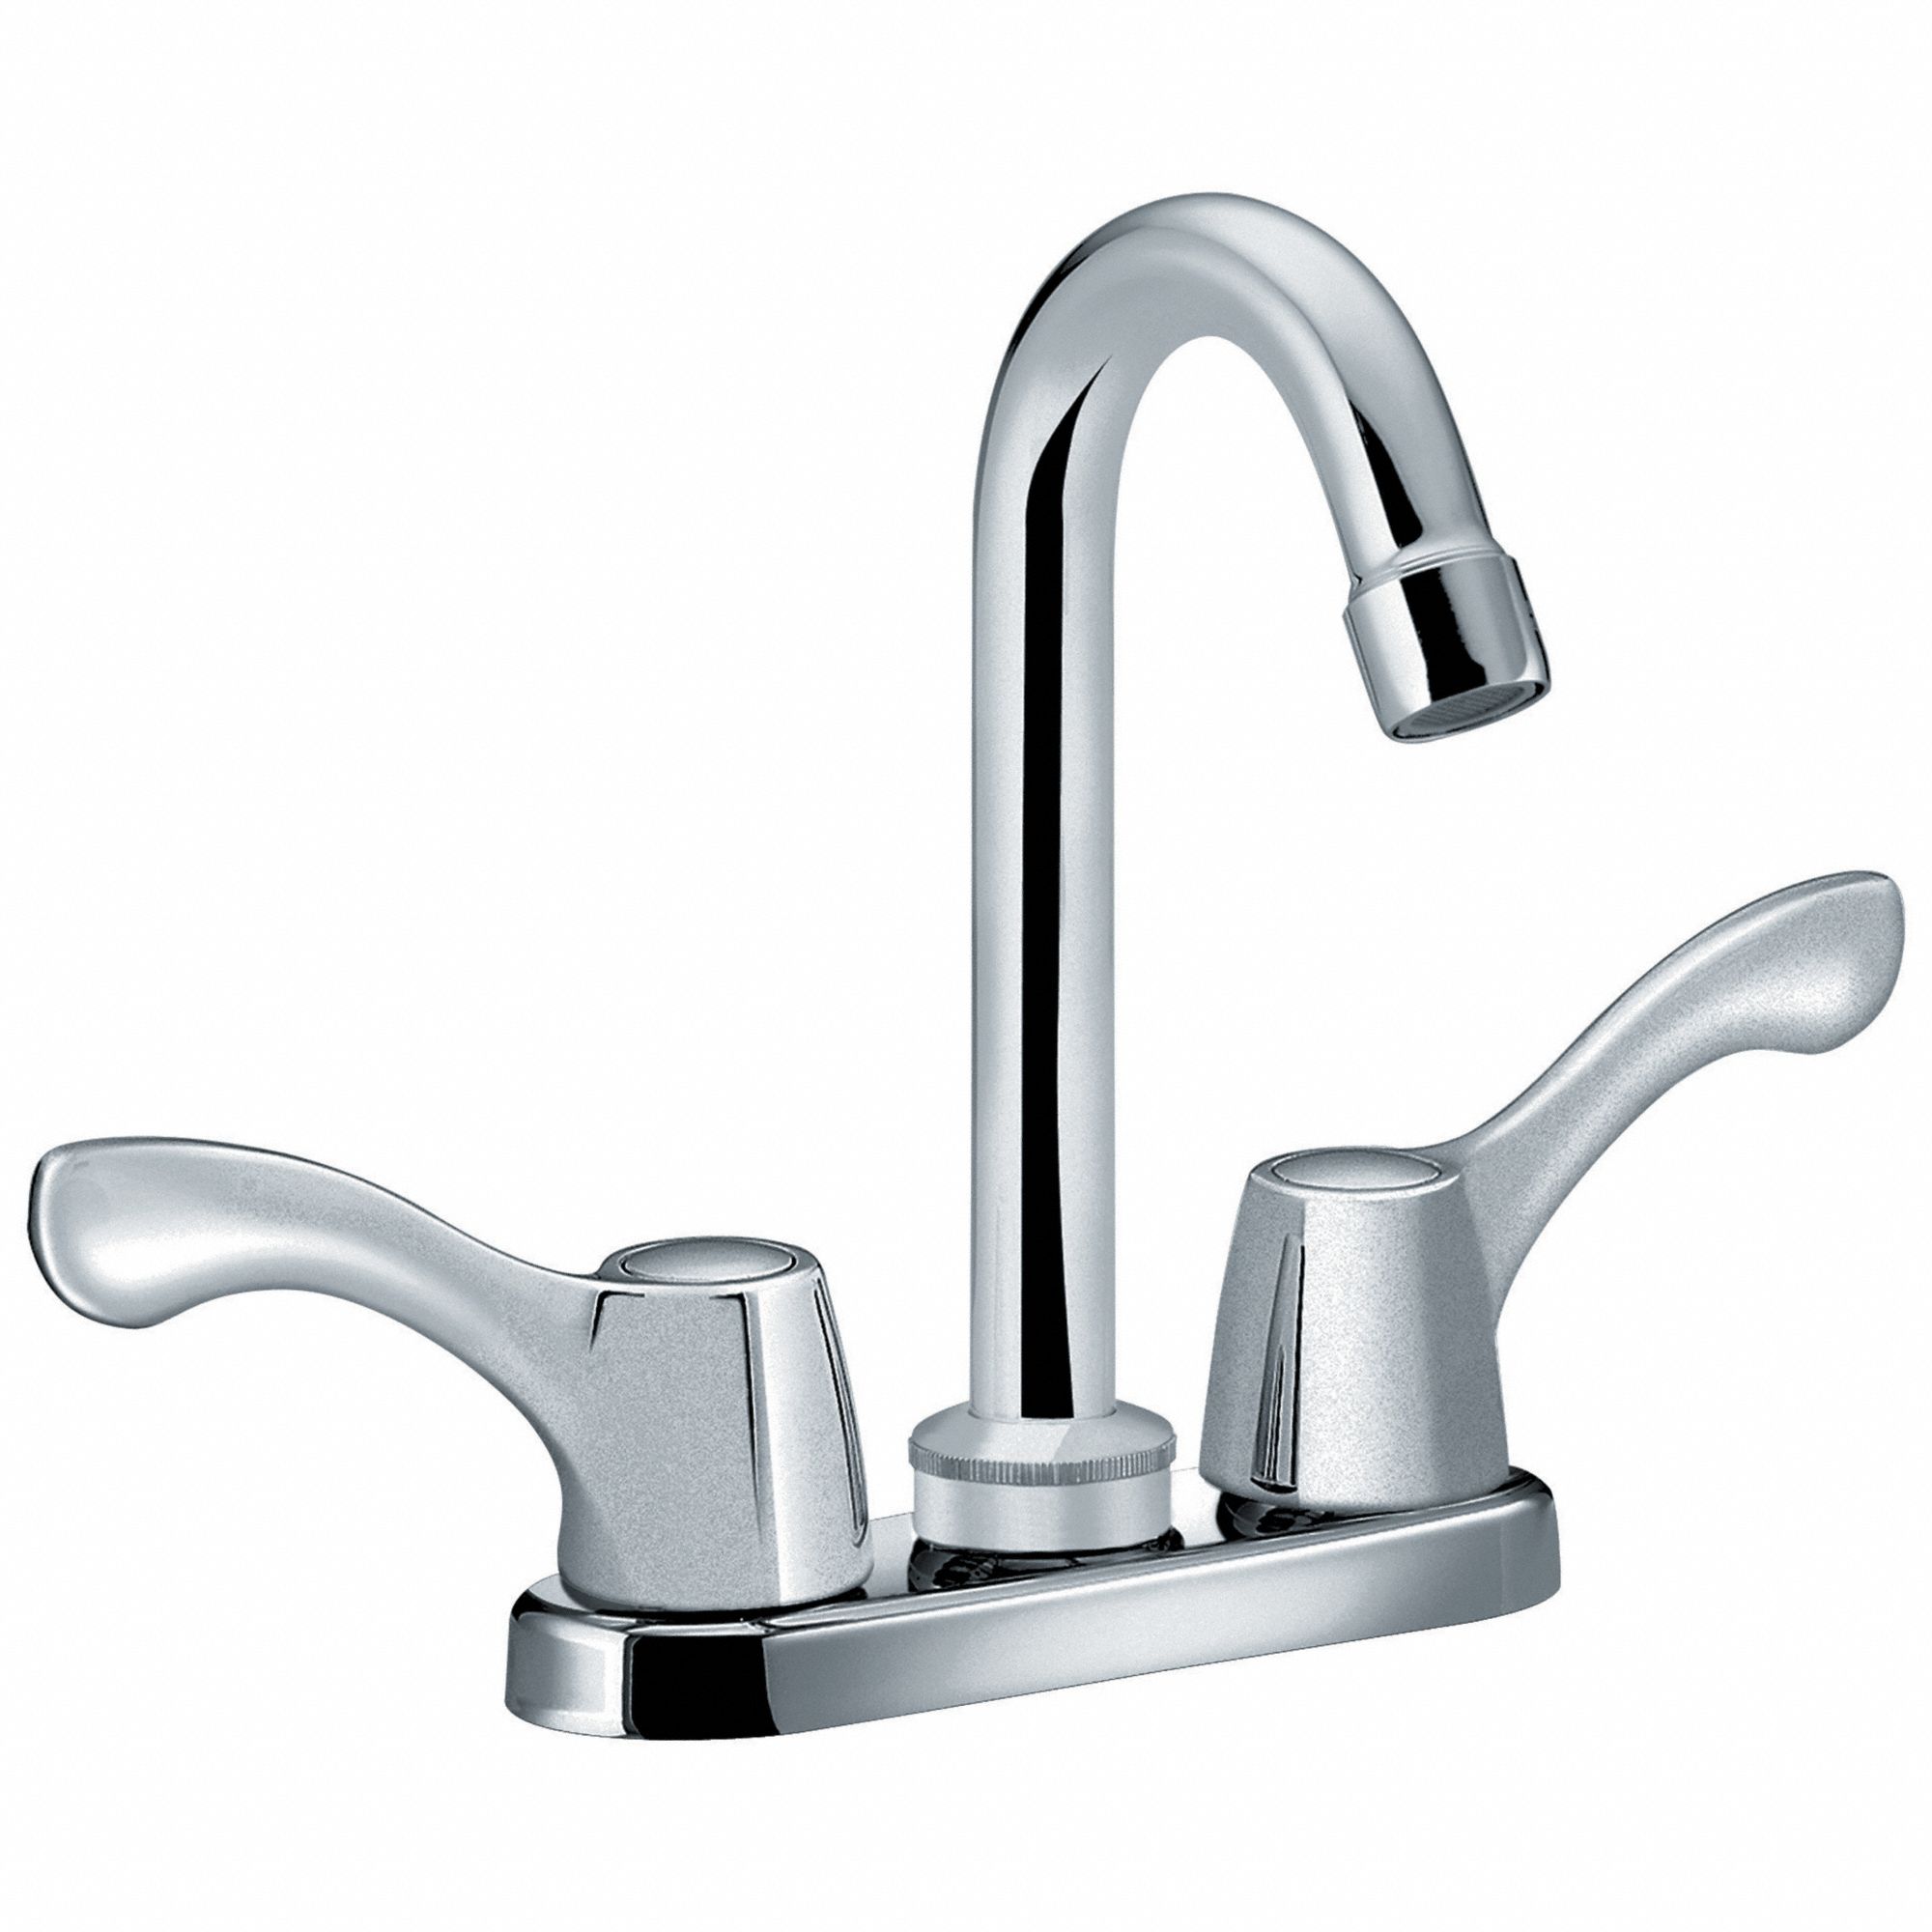 Faucet: Cornerstone®, Chrome Finish, 1.5 gpm Flow Rate, Drain Not Included Drain